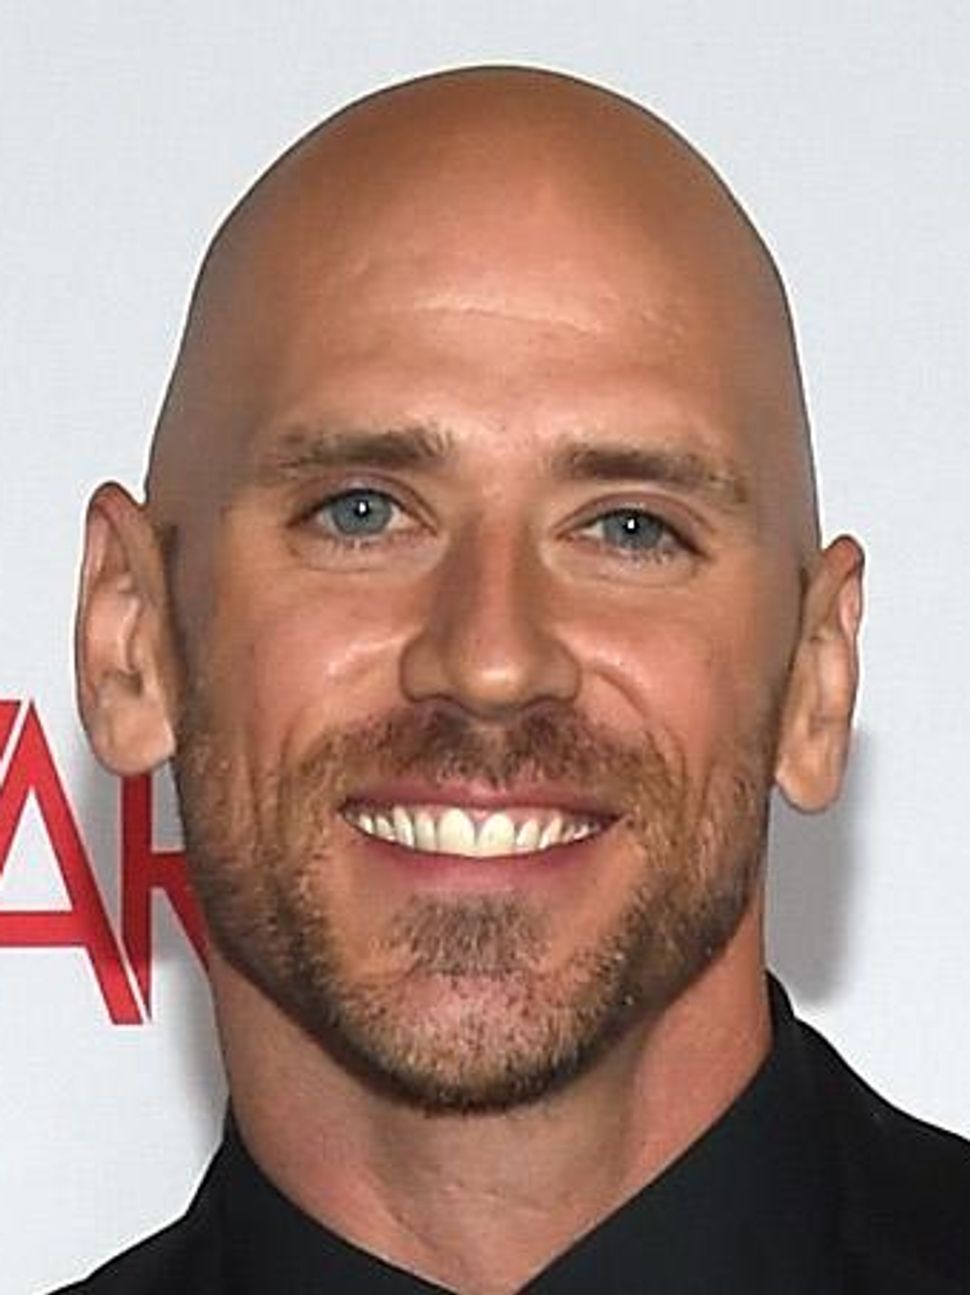 Porn star Johnny Sins reveals what men are doing wrong in the bedroom |  indy100